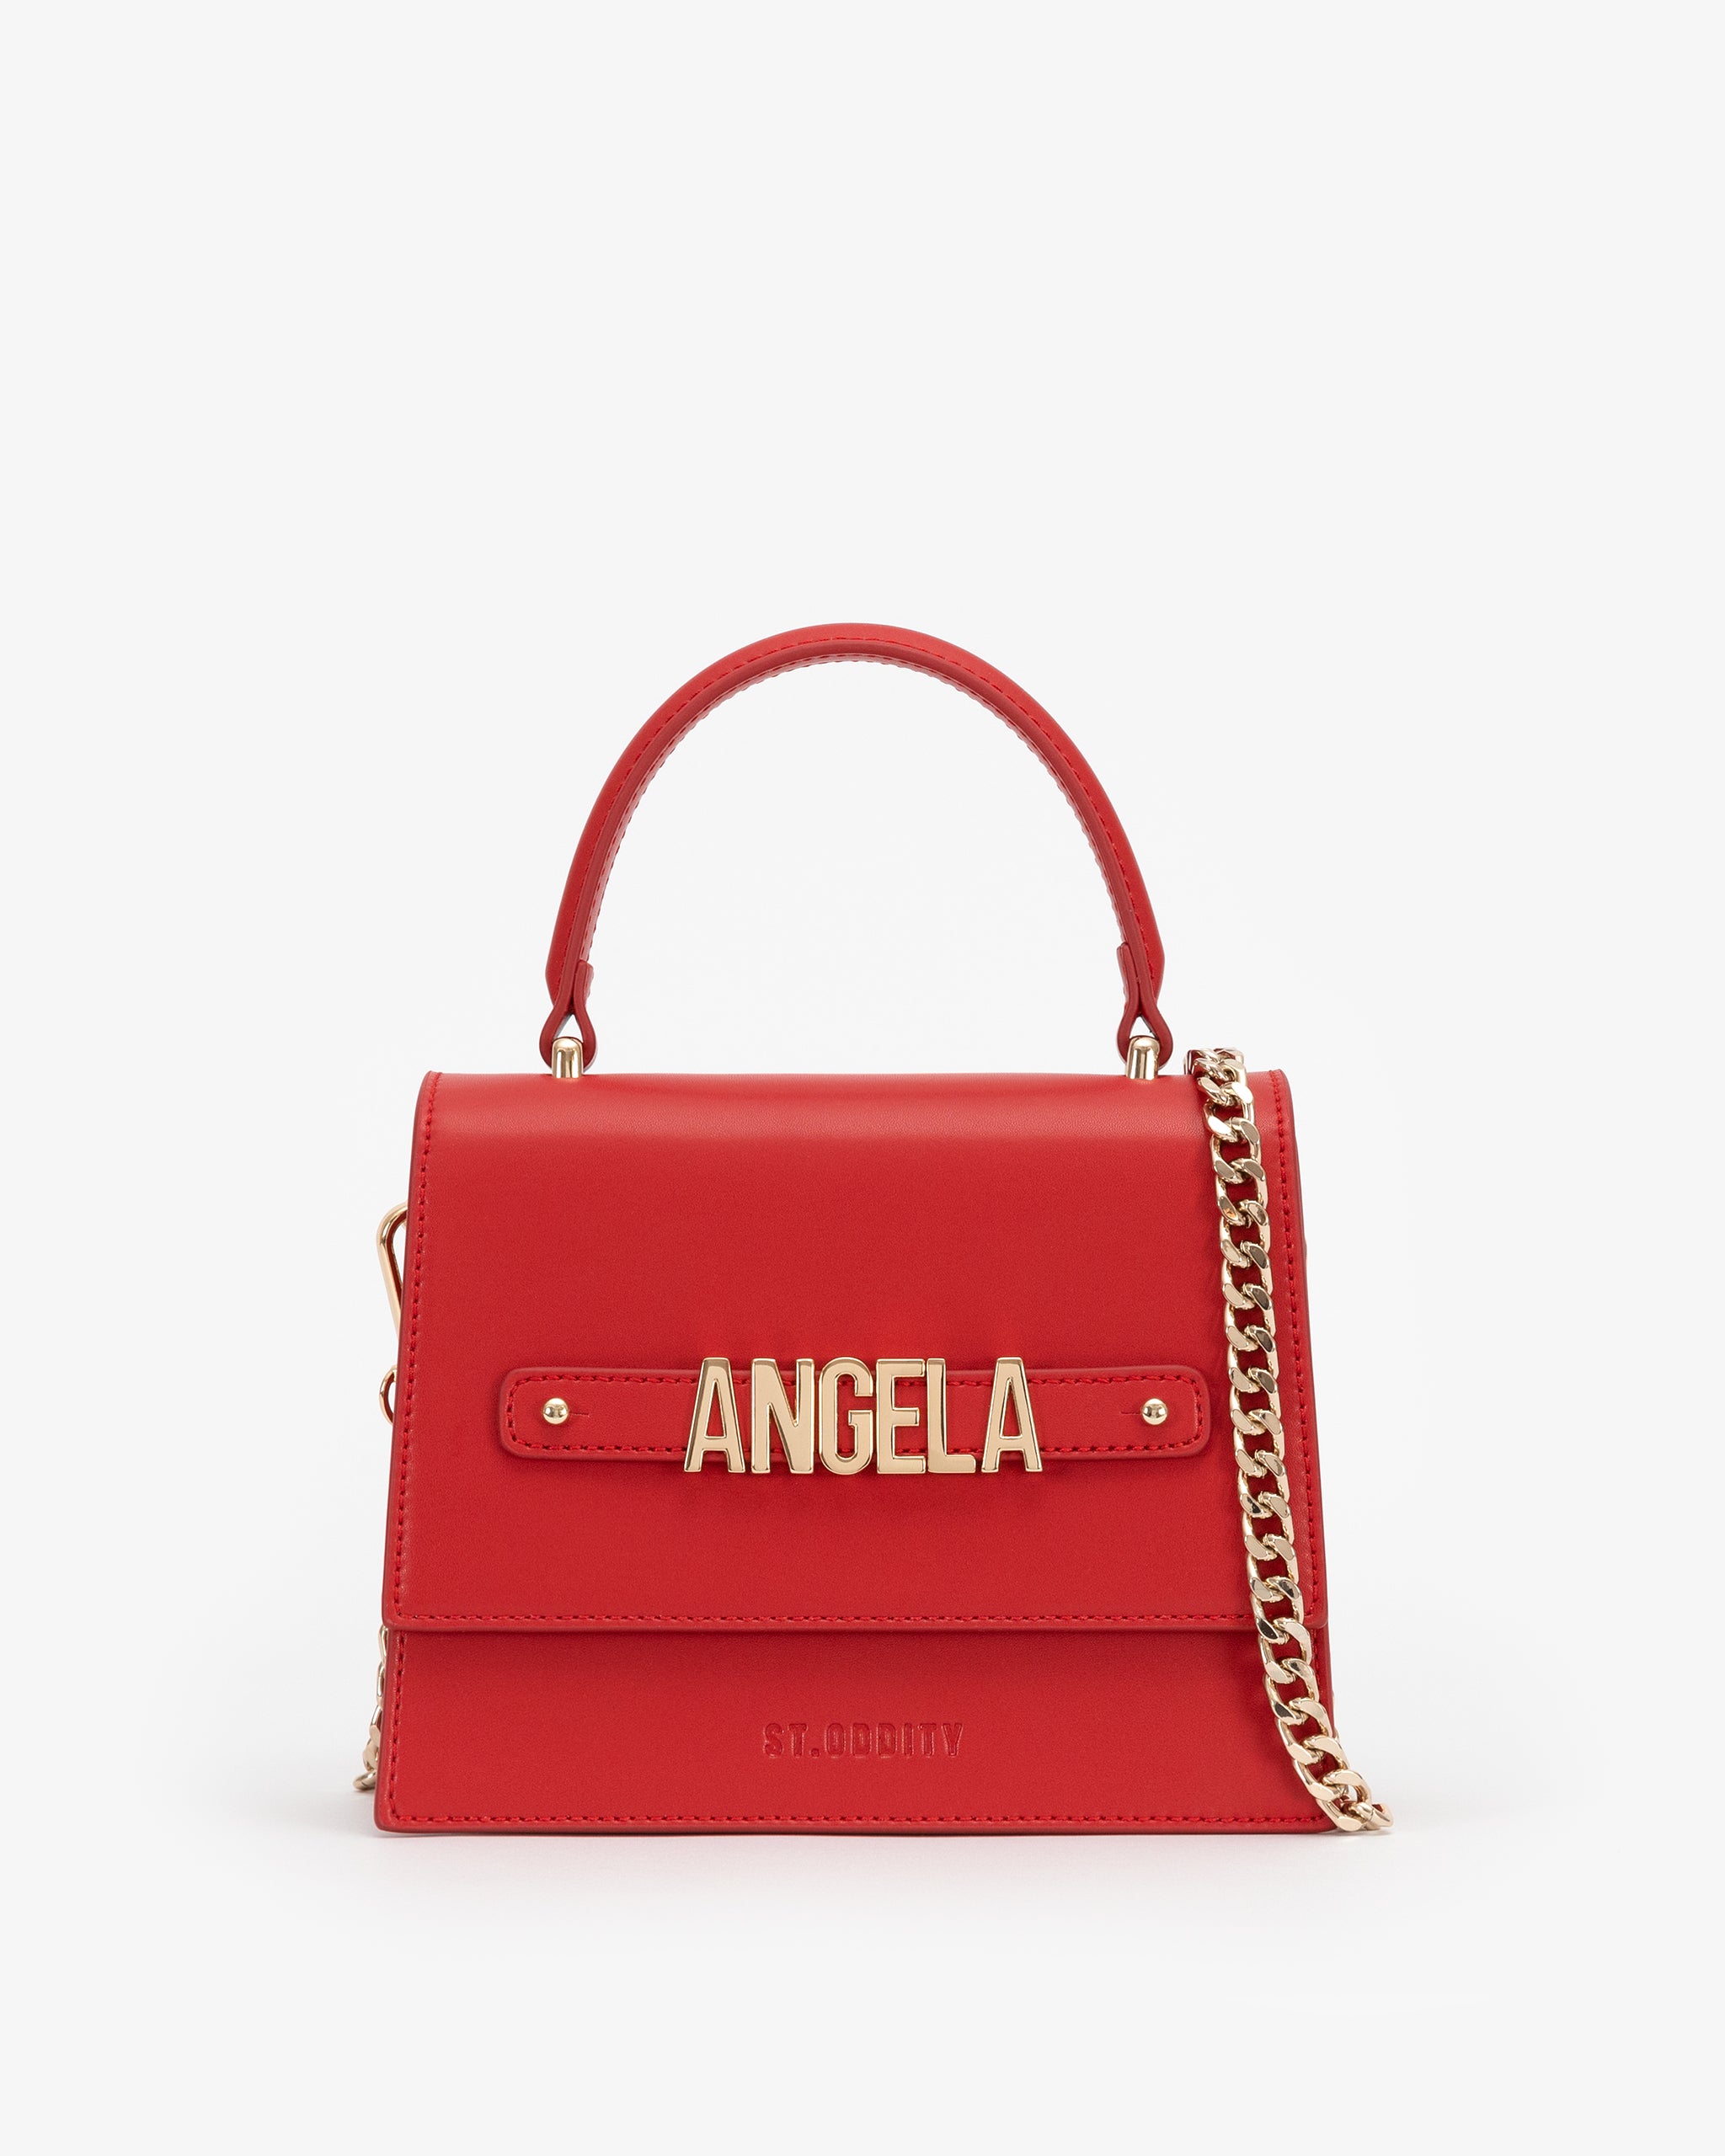 Evening Bag in Red with Personalised Hardware